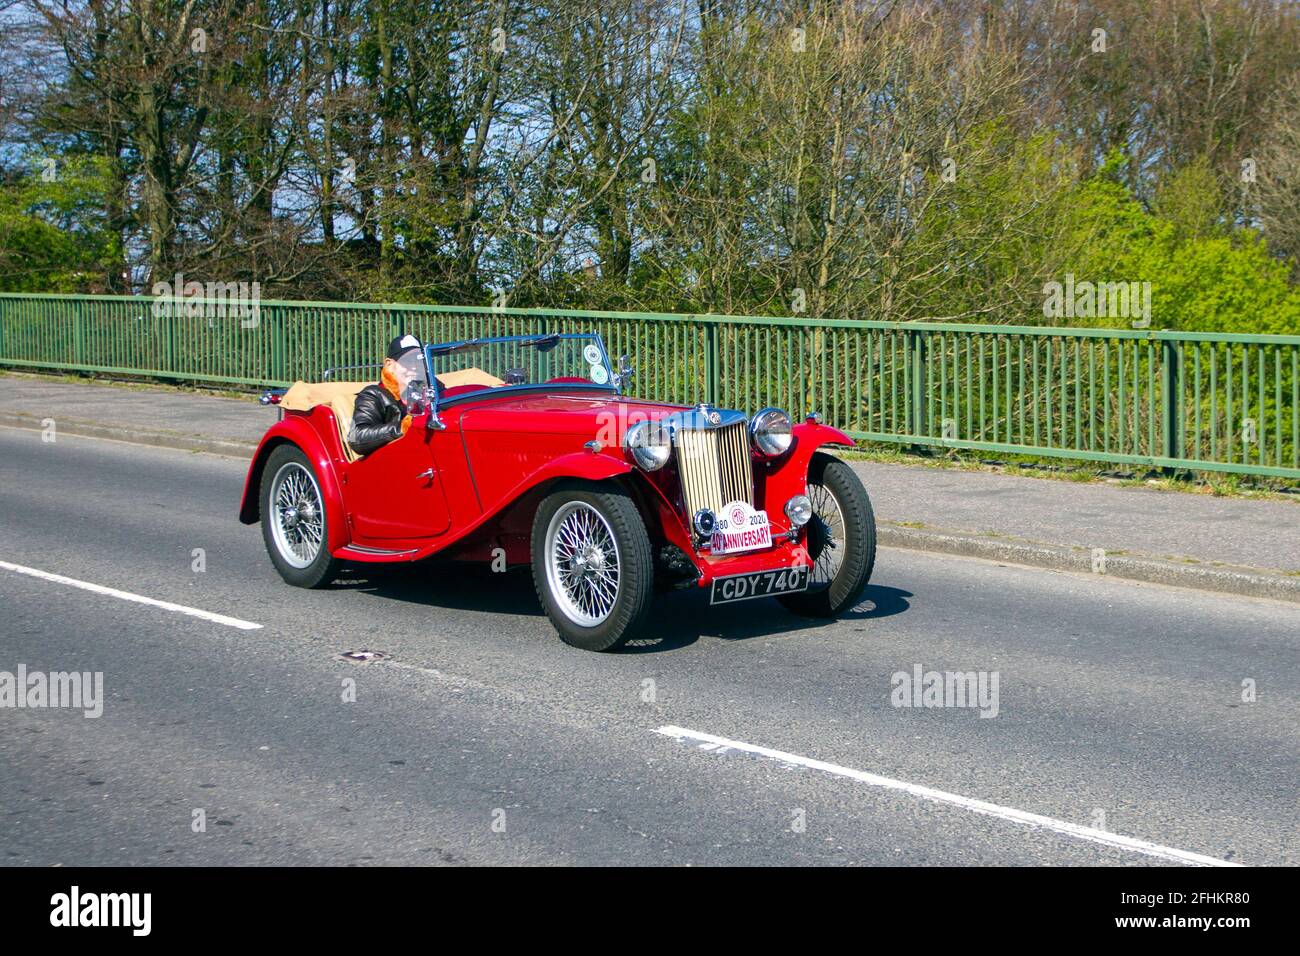 1947 40s MG red 1250cc roadster; moving vehicles, cars, vehicle driving,  roads, motors, motoring, UK road network. Stock Photo